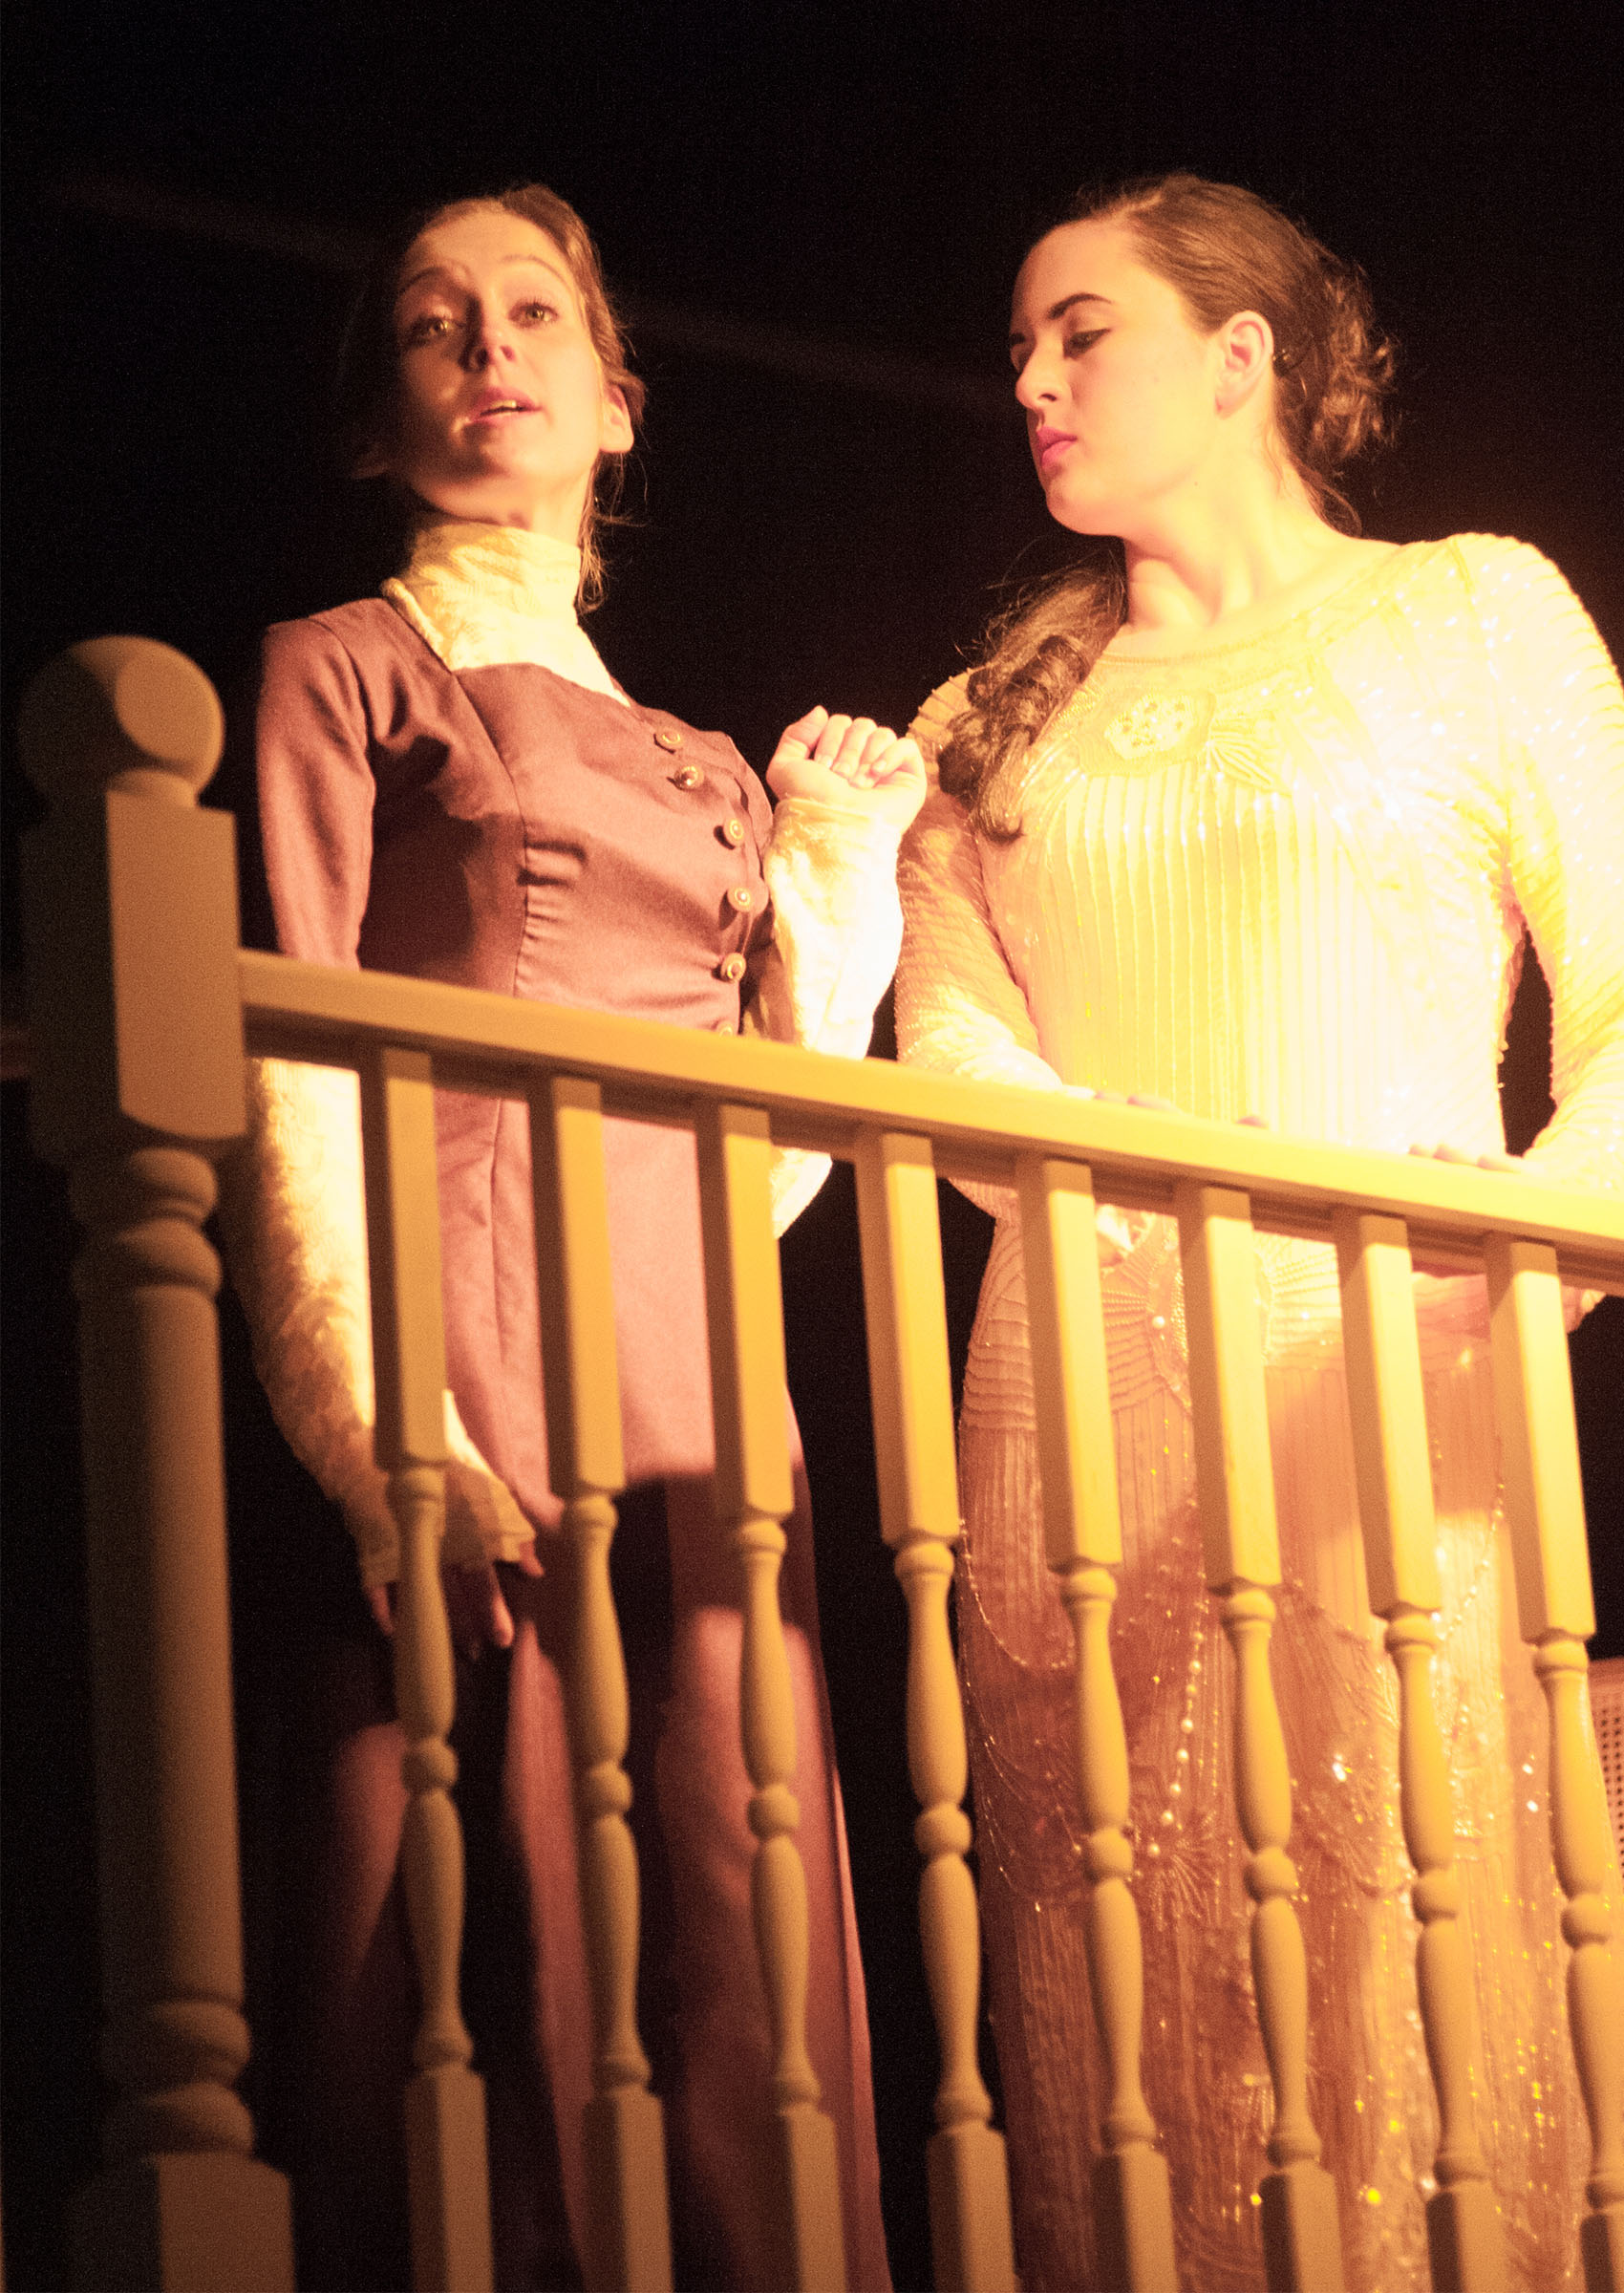 Two women are in conversation, one looking to the audience n=and speaking, the other standing beside her to her left, intently listening and glancing down. They’re standing on a staircase/balcony of sorts, and harsh yellow lighting is cast upon them both. 